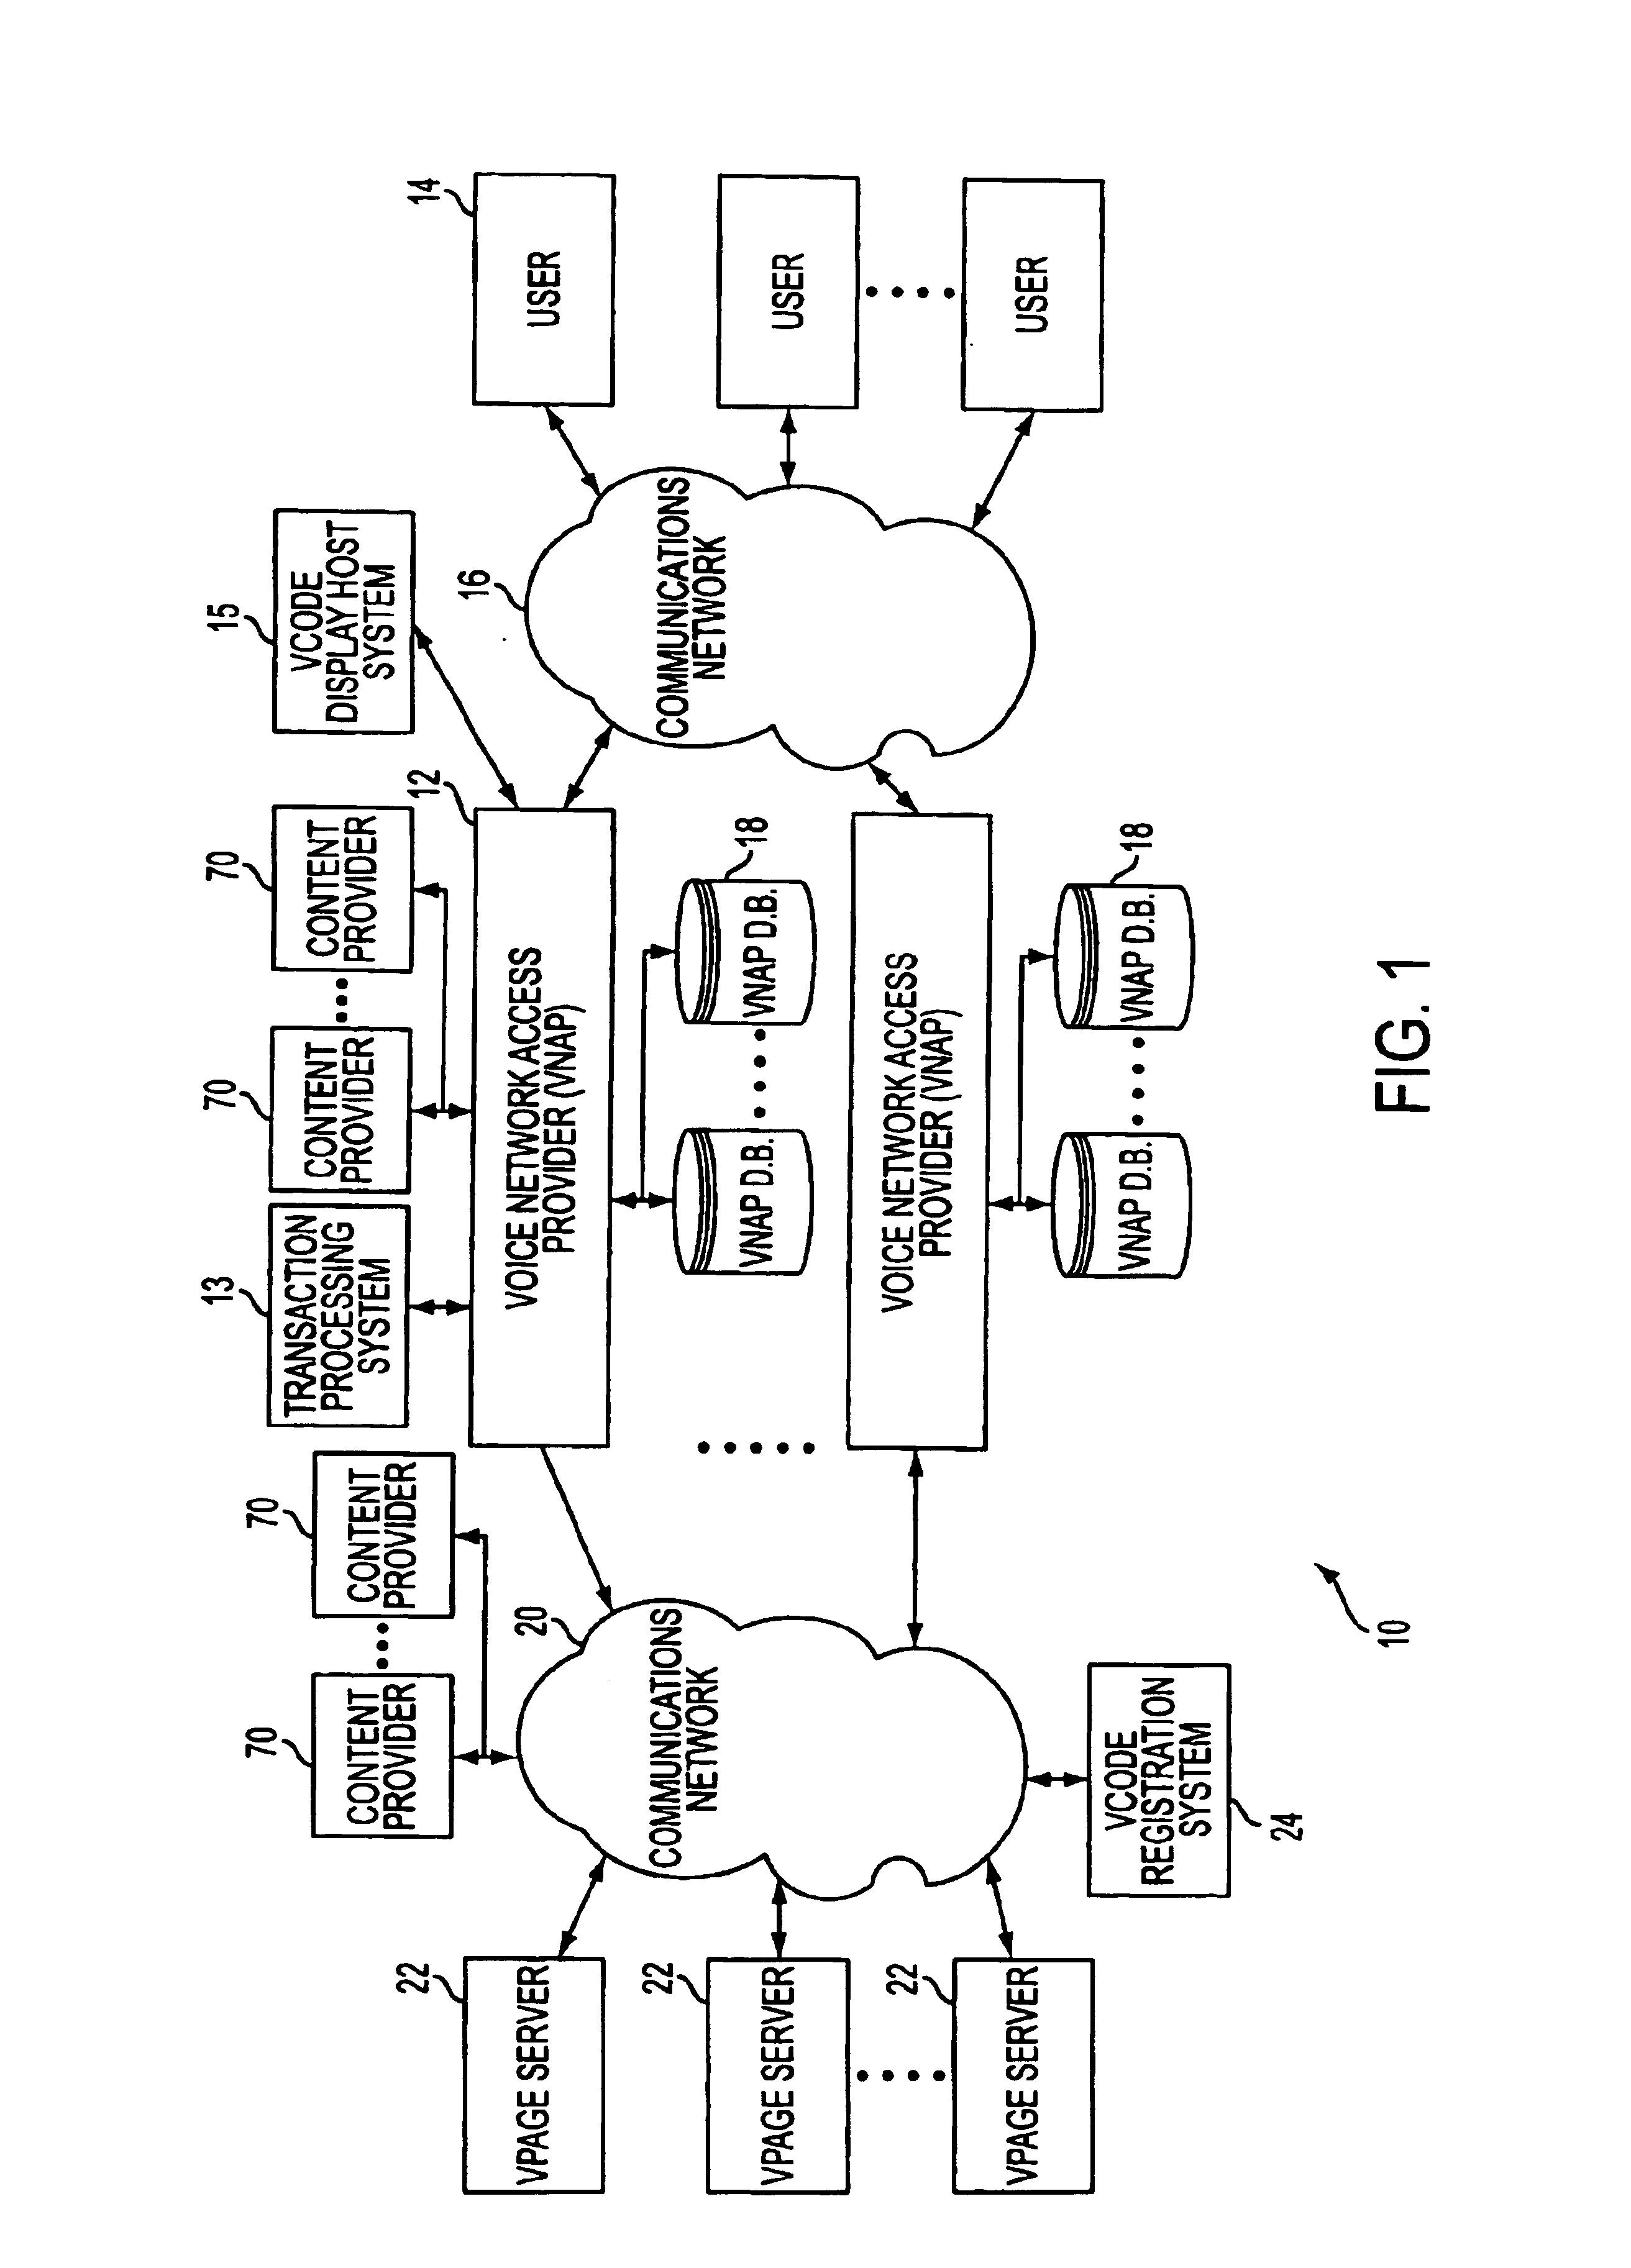 System and method for generating voice pages with included audio files for use in a voice page delivery system